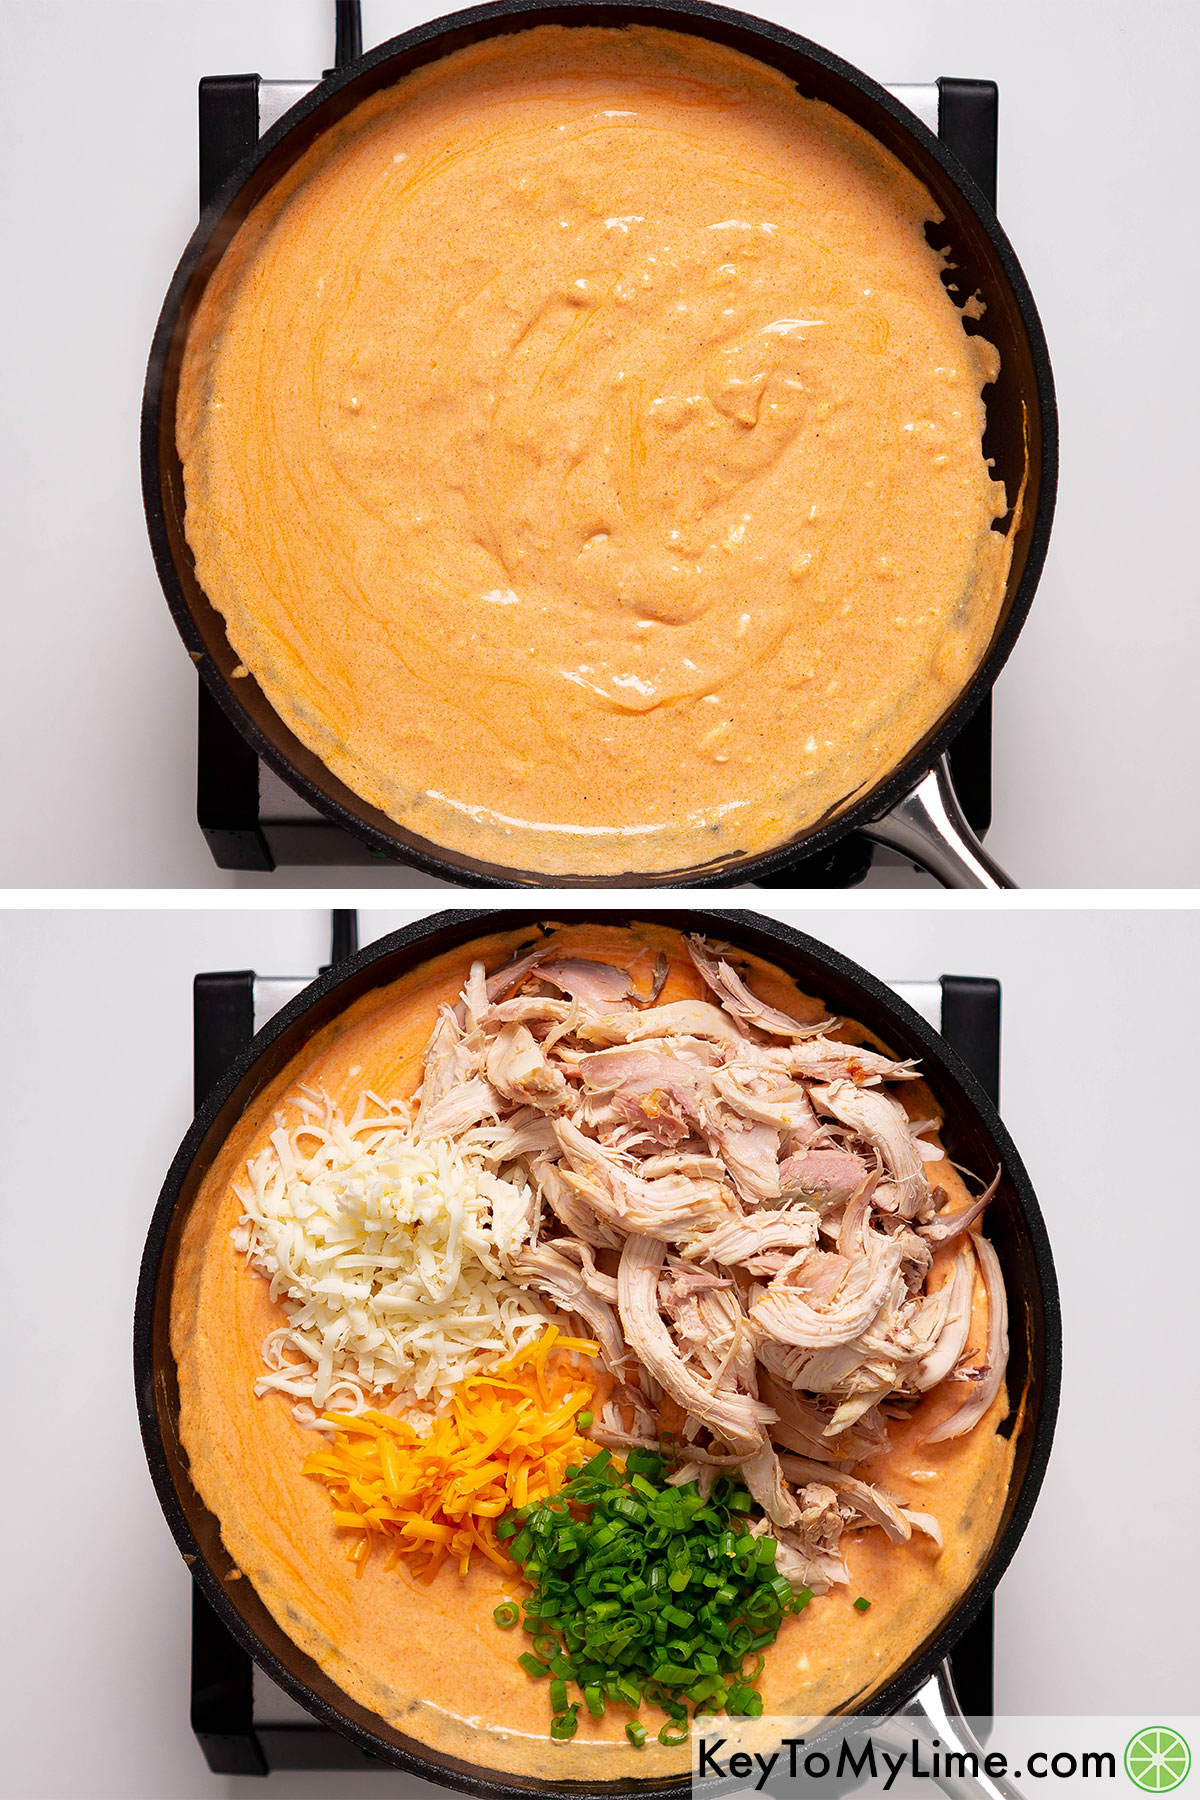 Mixing shredded chicken and cheese into creamy Buffalo dip.